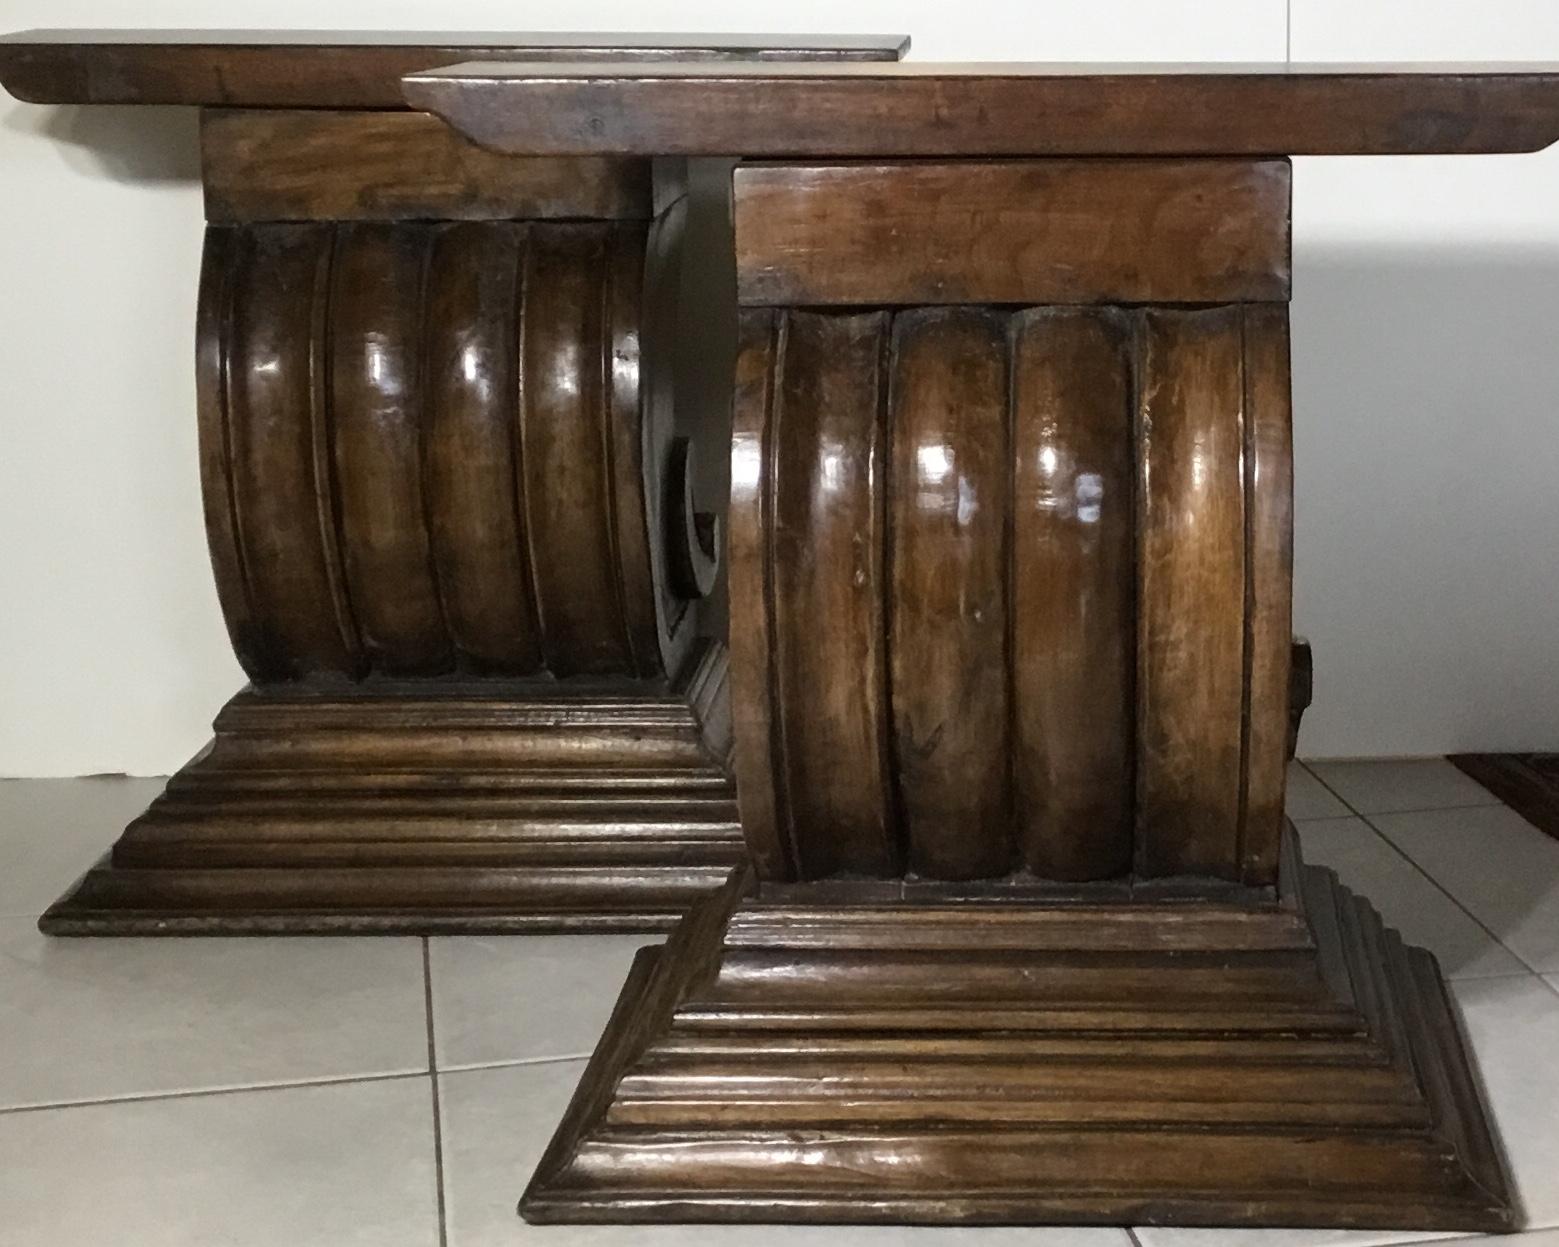 Exceptional pair of antique hand carved wood architectural fragments , made to be a beautiful pair of console or together a great base for dining table with glass or marble top , the pair are made of solid wood ,probably walnut wood and very strong